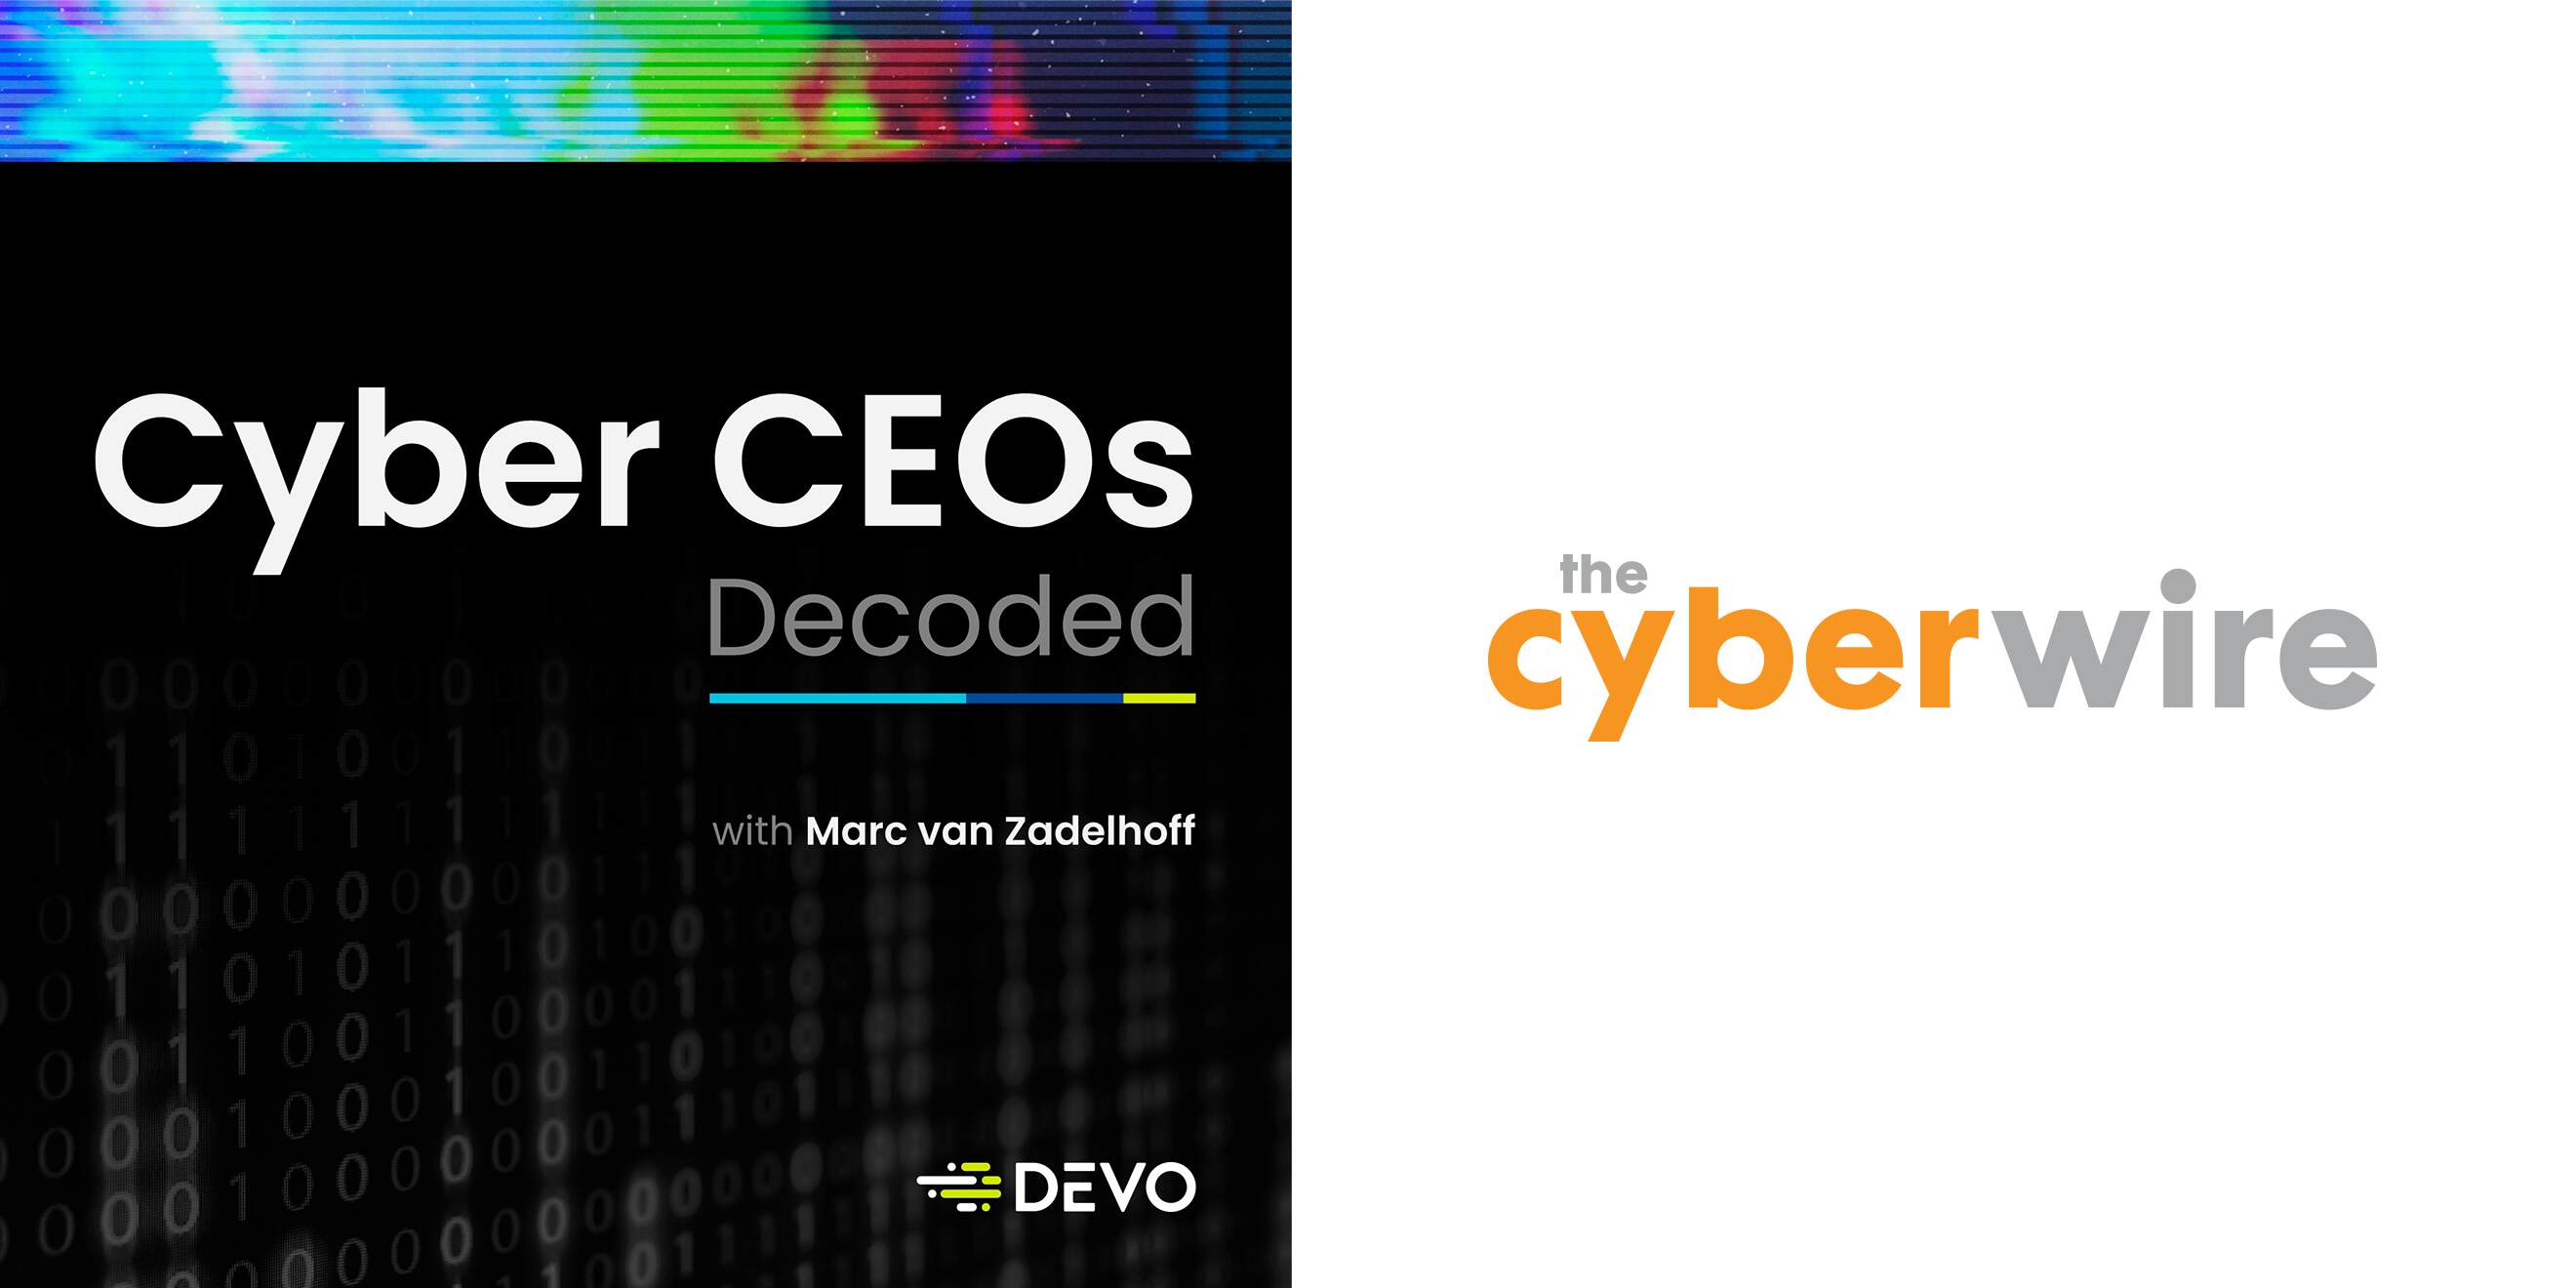 Devo Launches Cyber CEOs Decoded Podcast with the CyberWire Network